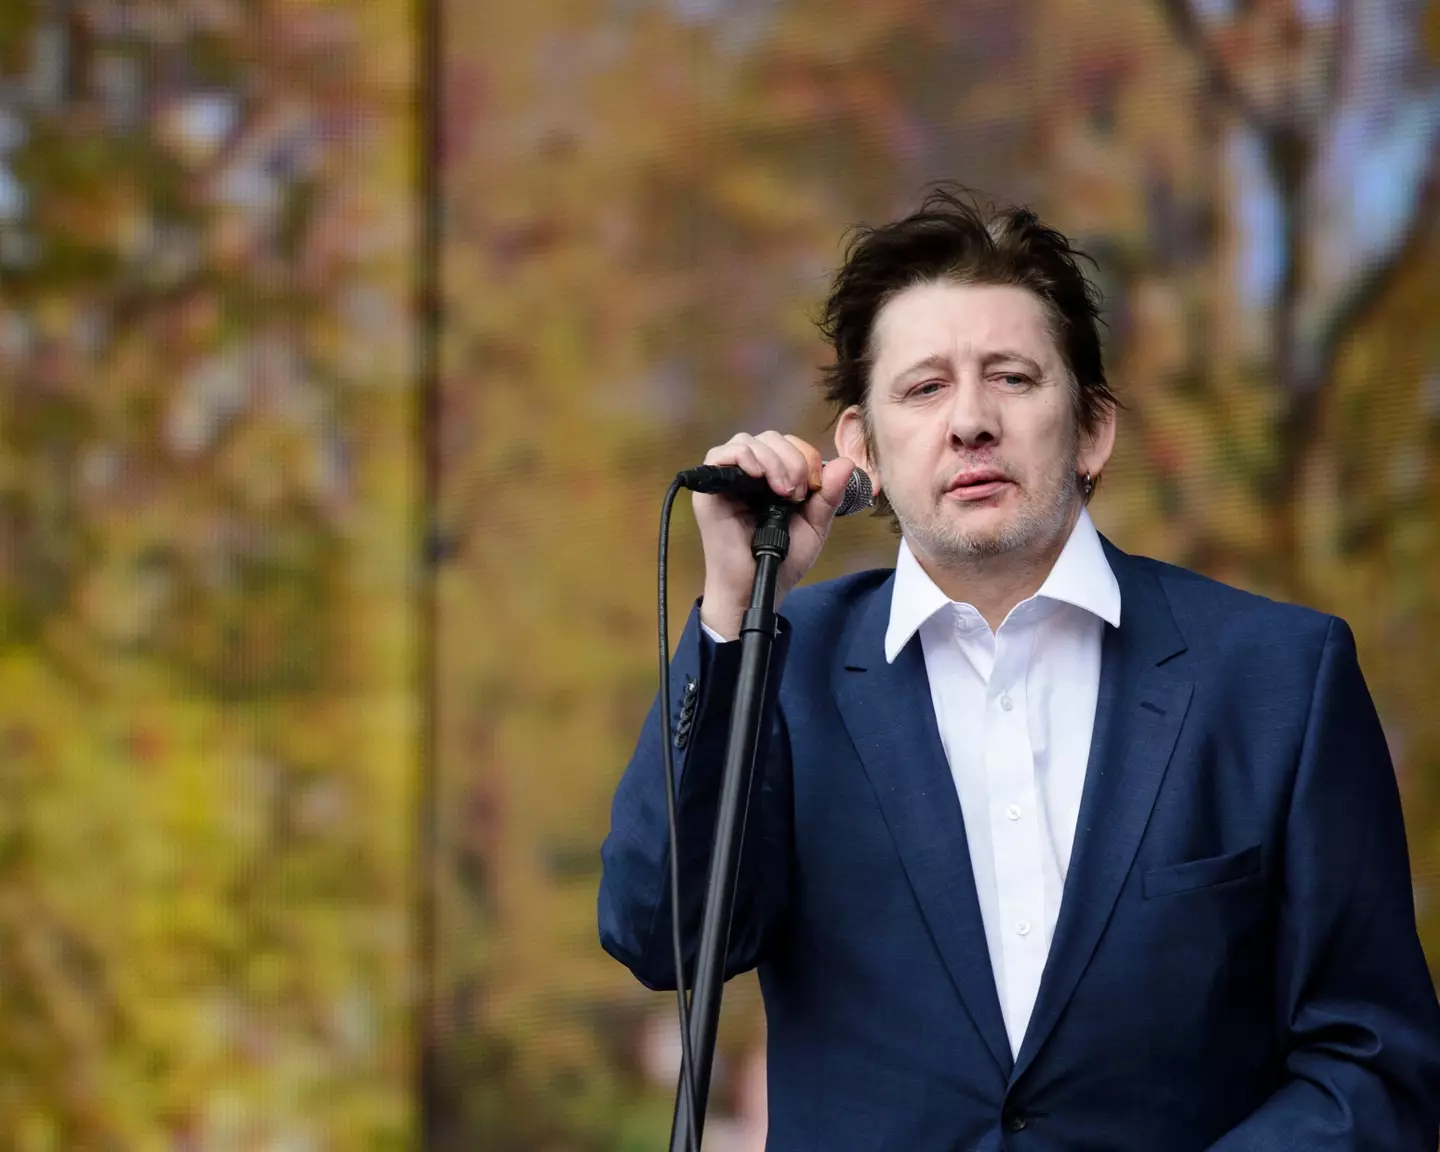 MacGowan is best known for fronting The Pogues.